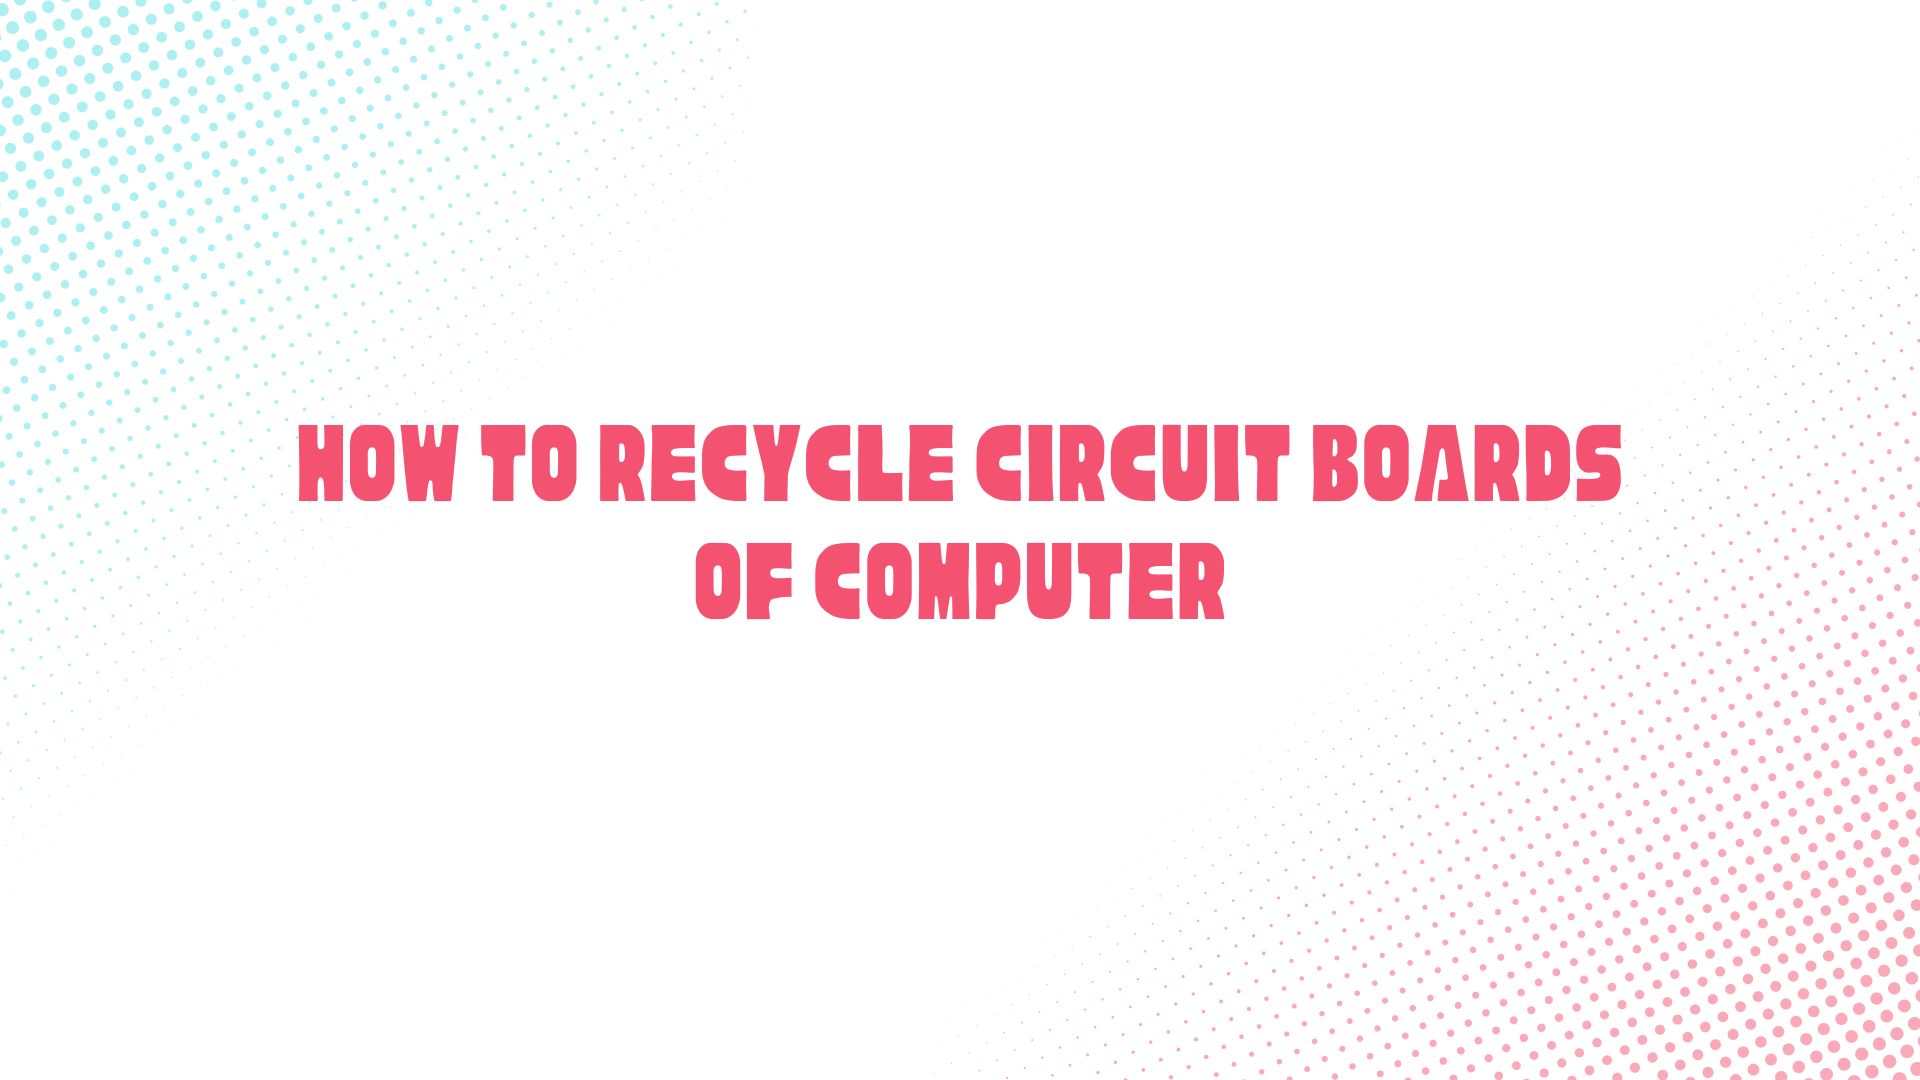 How to Recycle Circuit Boards of Computer